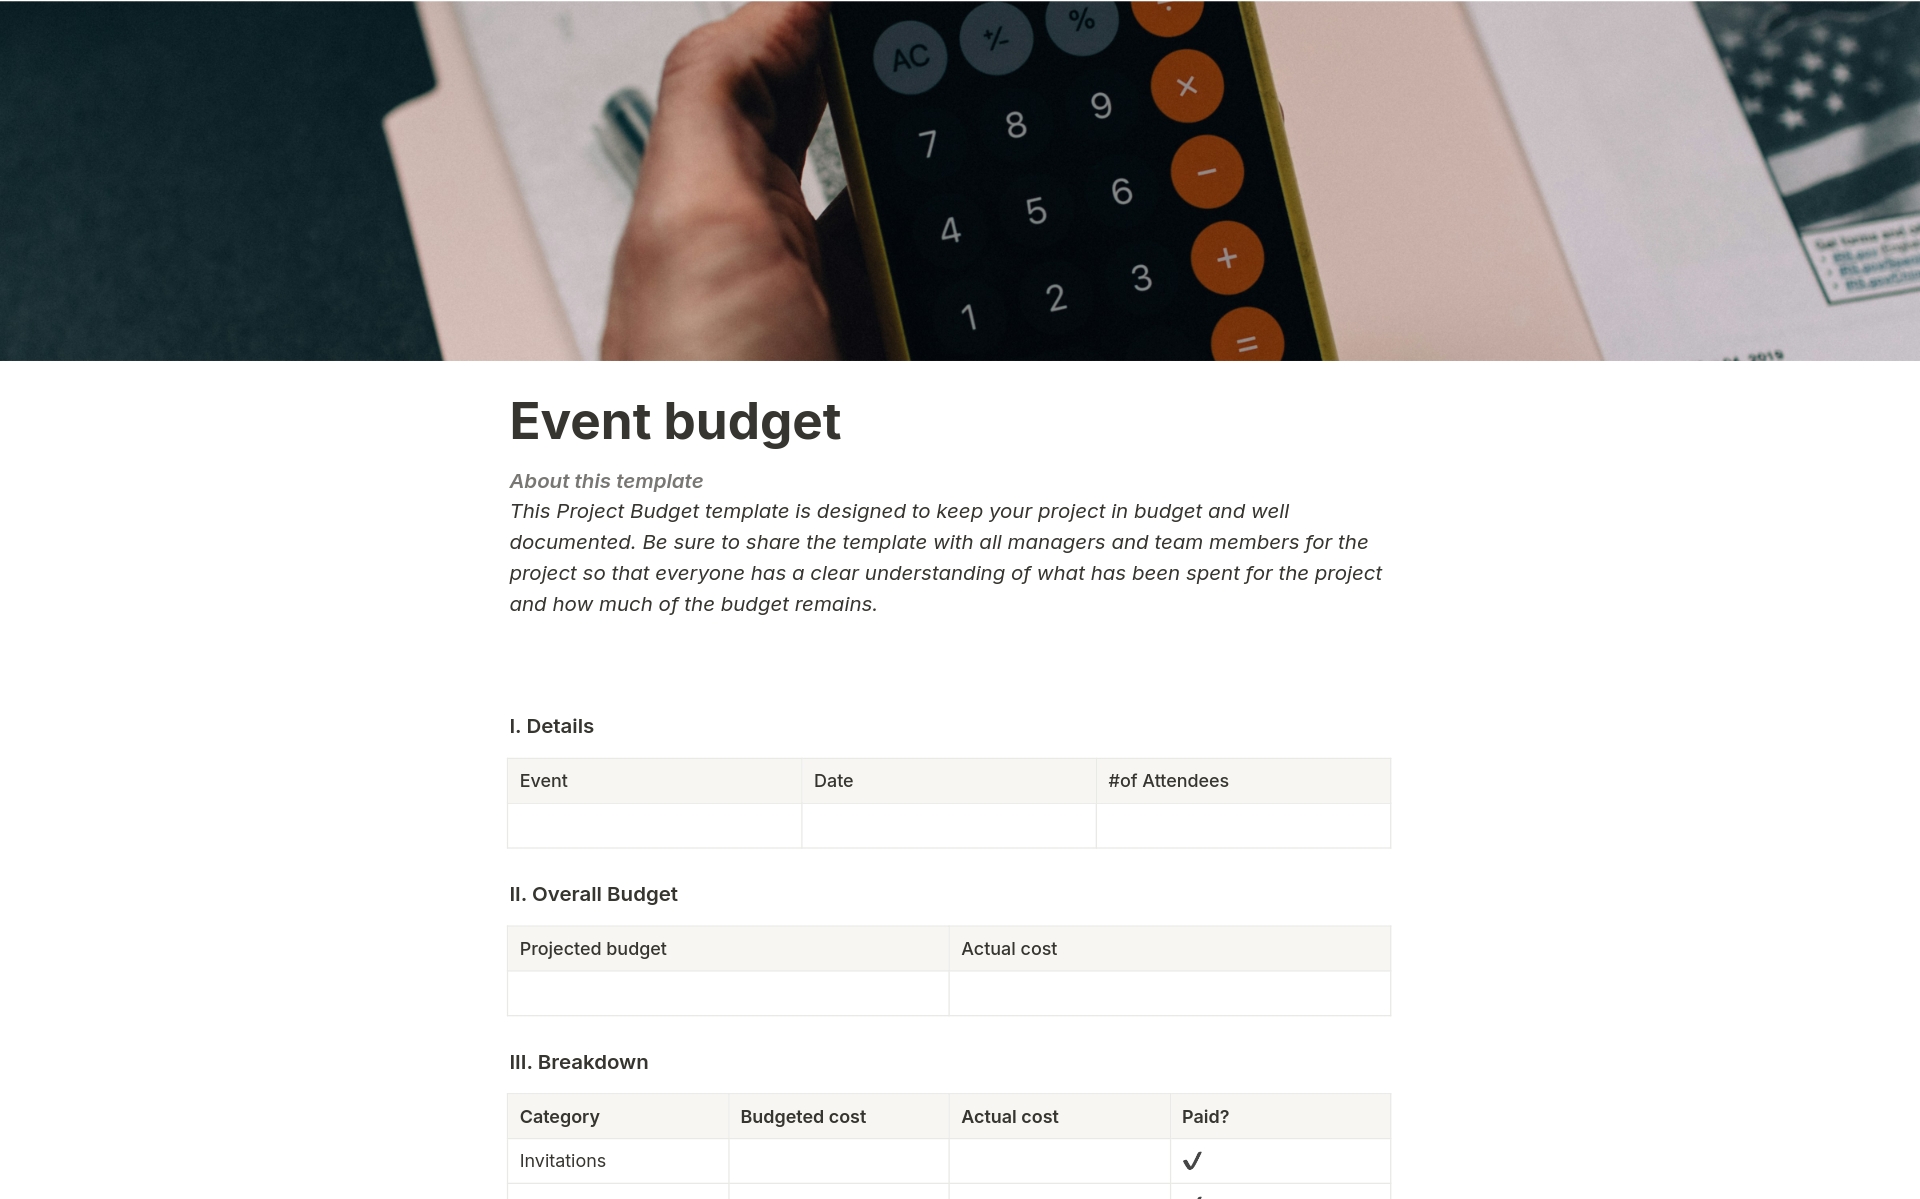 This Project Budget template is designed to keep your project in budget and well documented. 